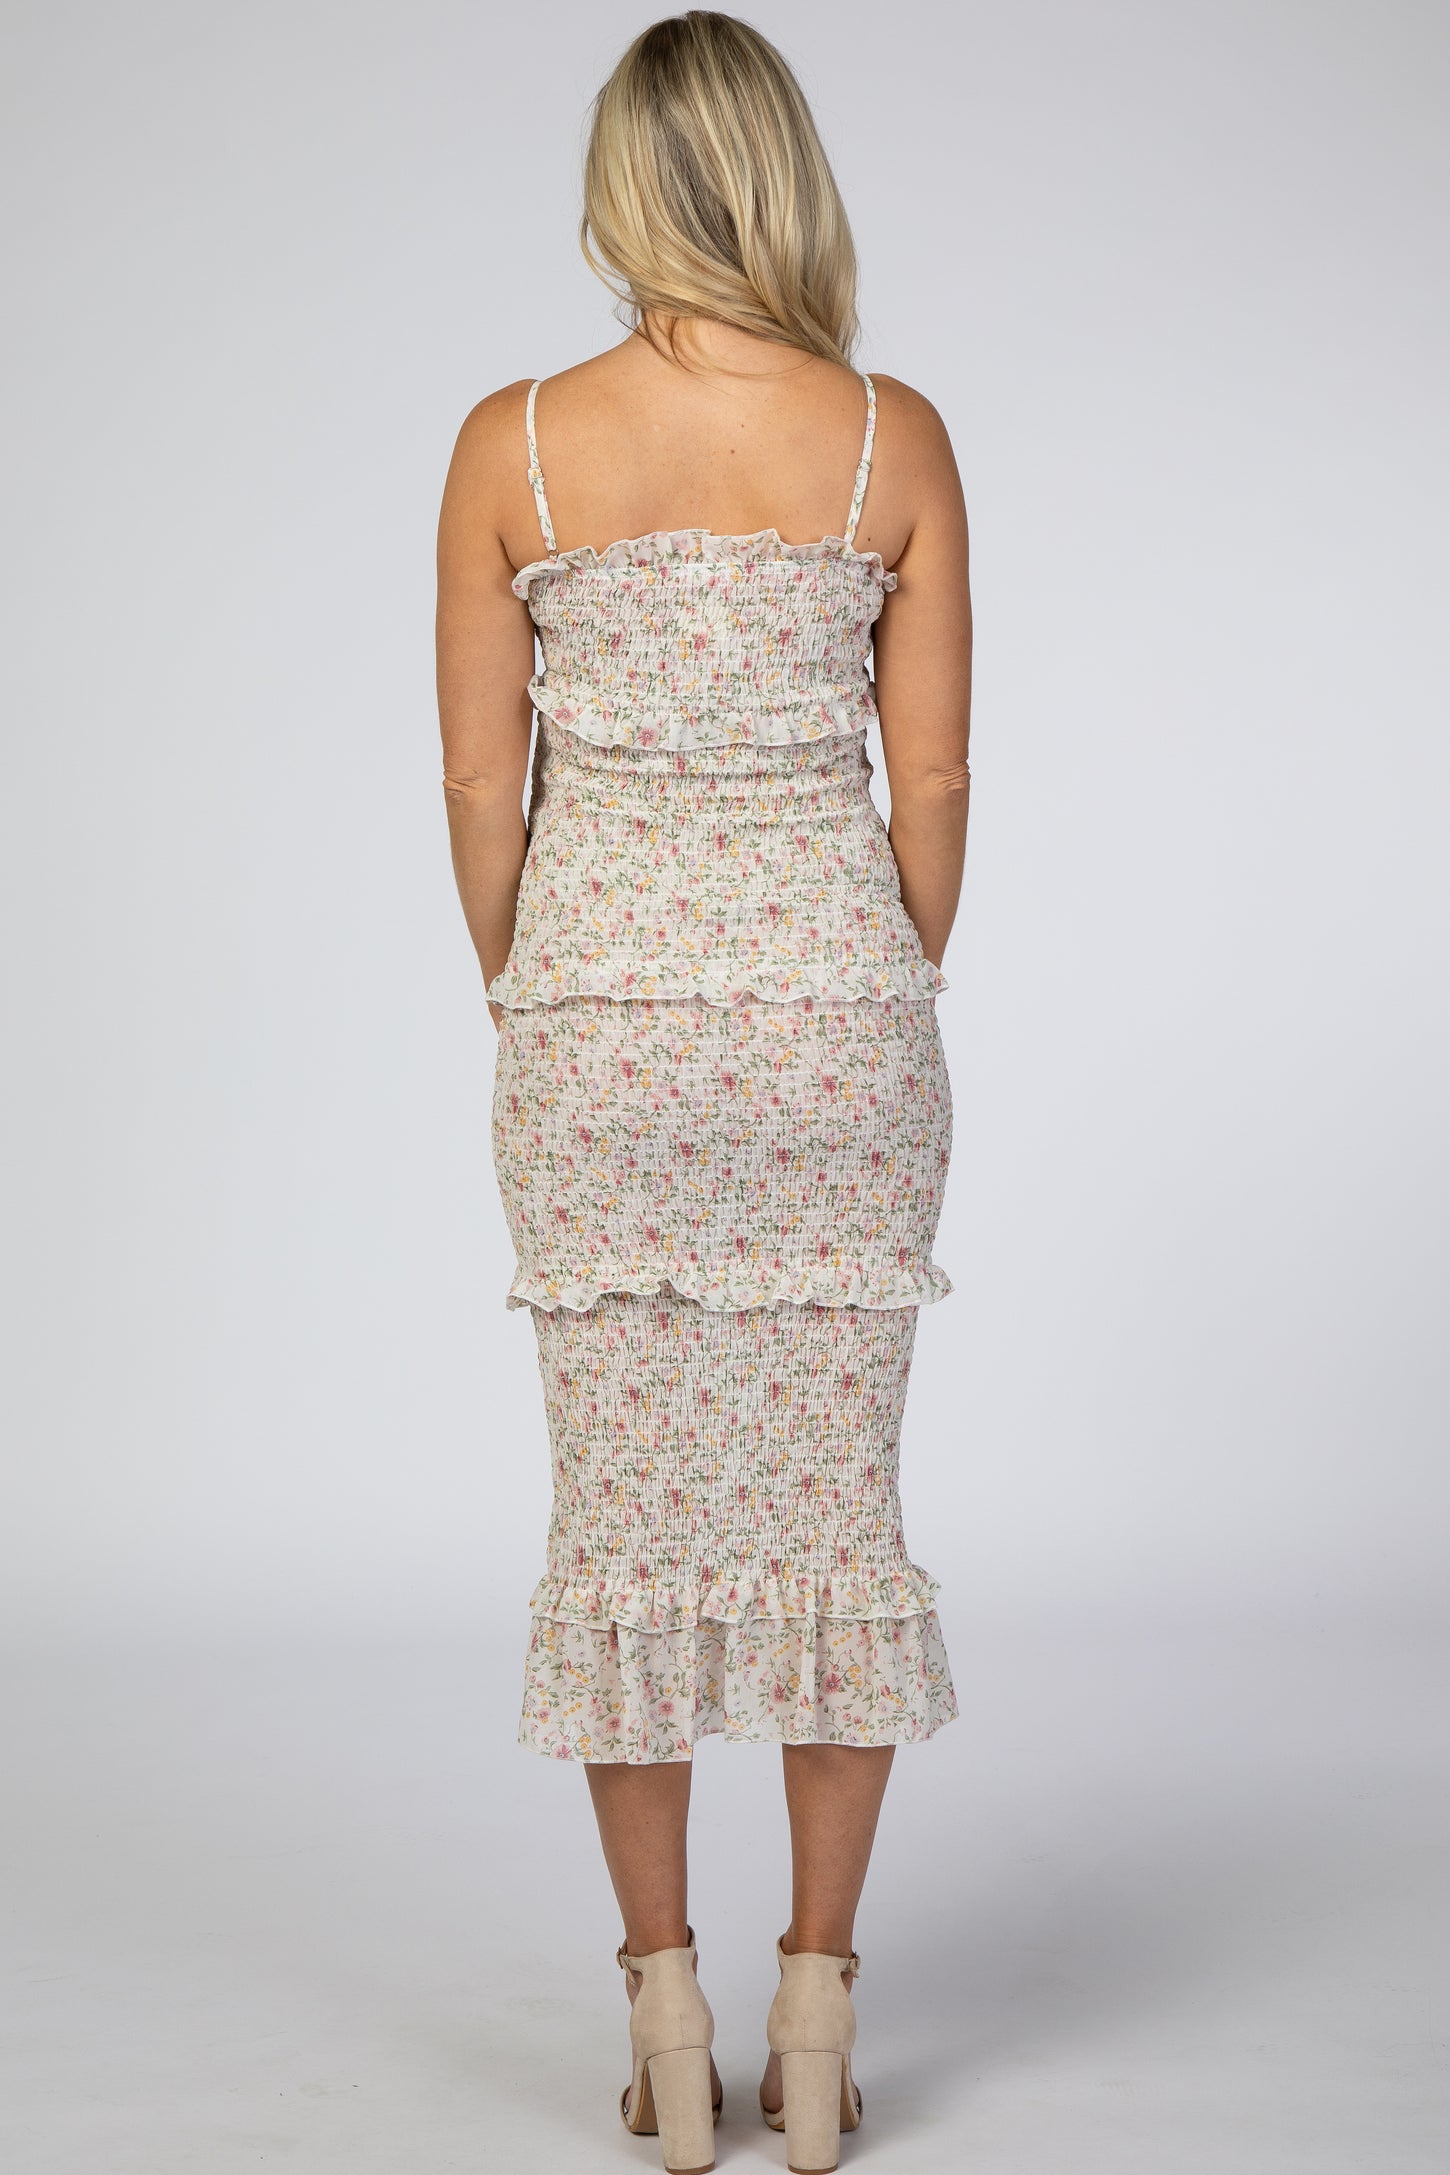 Ivory Floral Chiffon Smocked Fitted Maternity Midi Dress